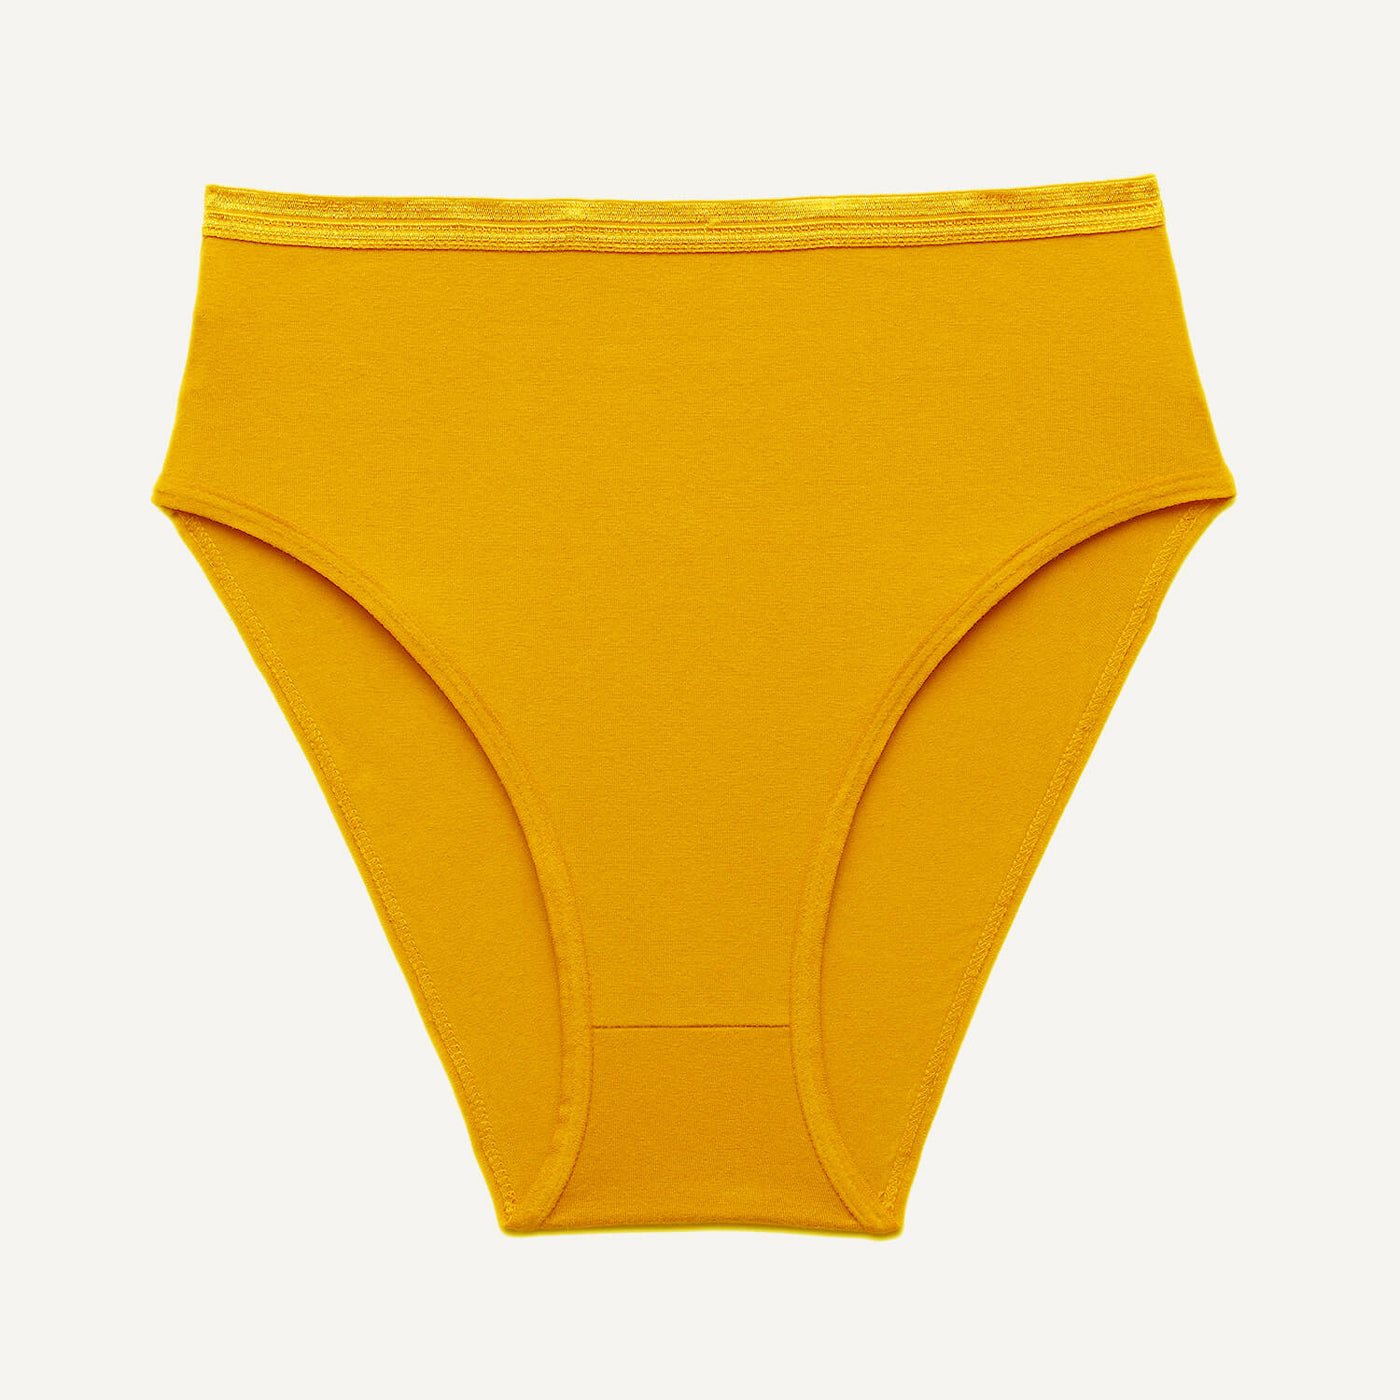 SALE High-Rise Brief in Bumble